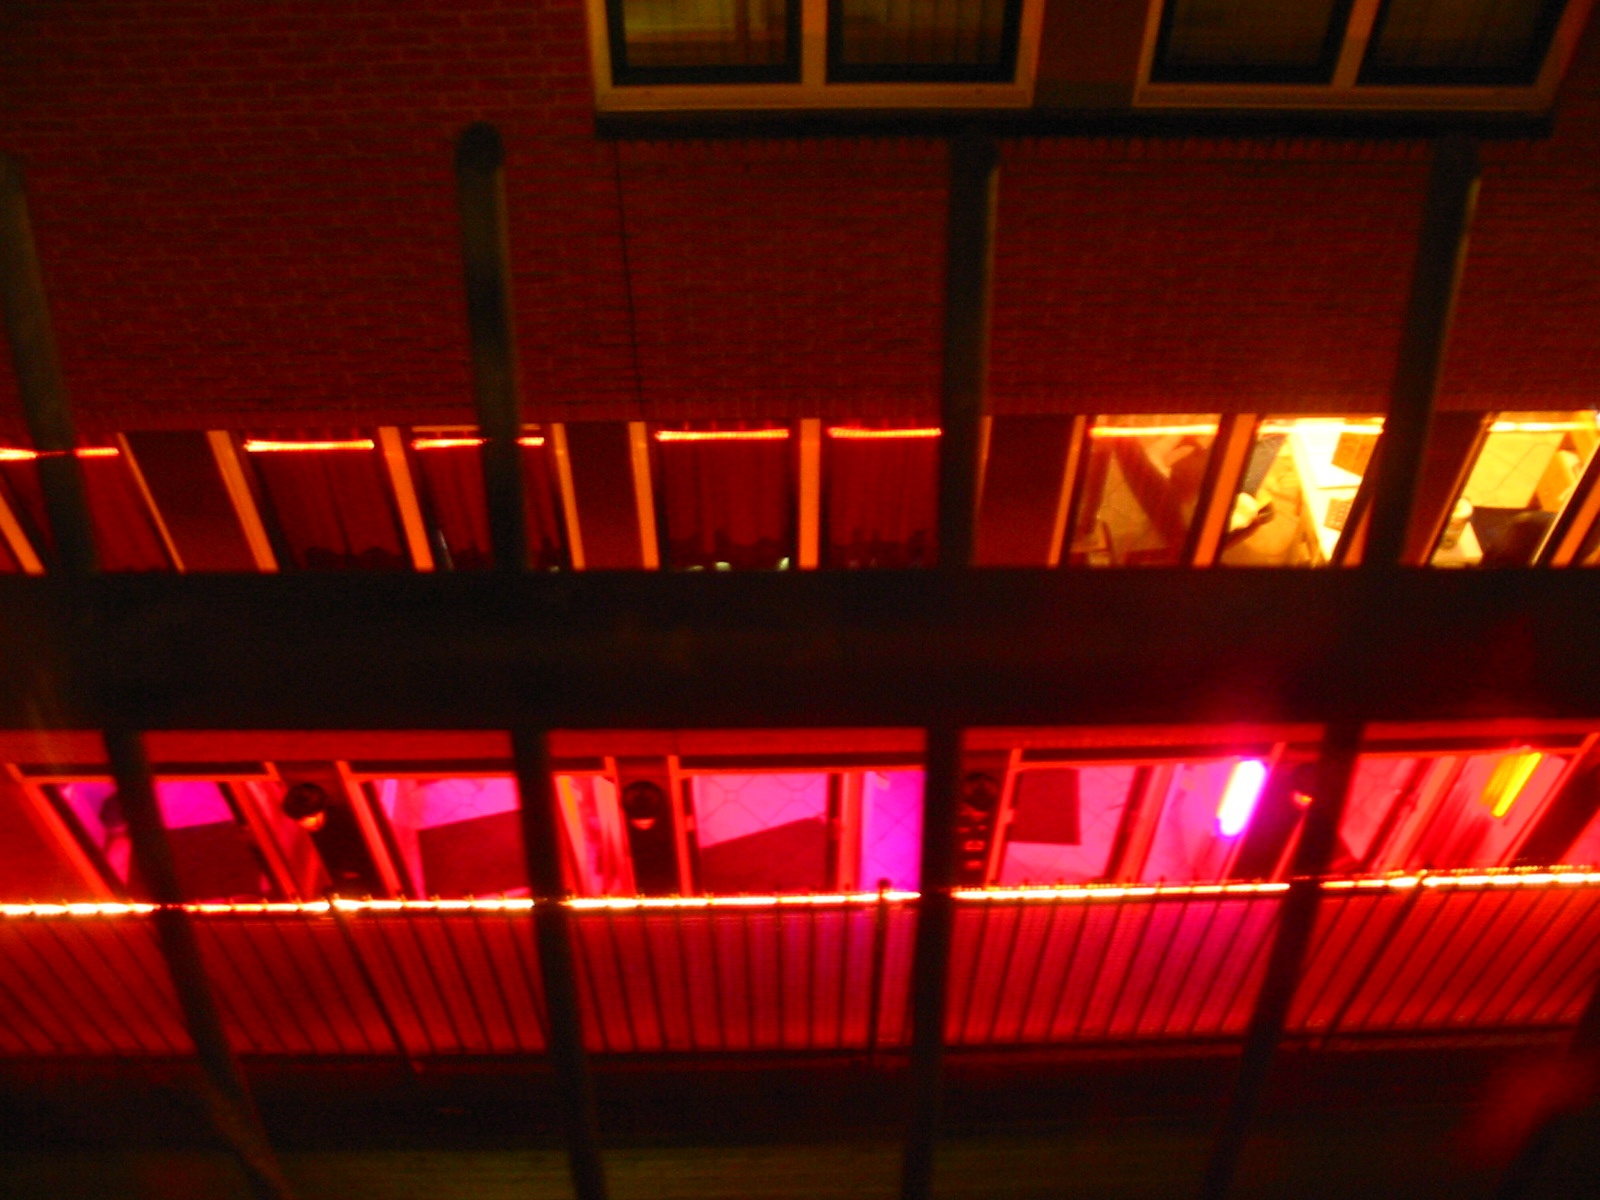 Red light for the Hague’s Red Light district? Souwie on